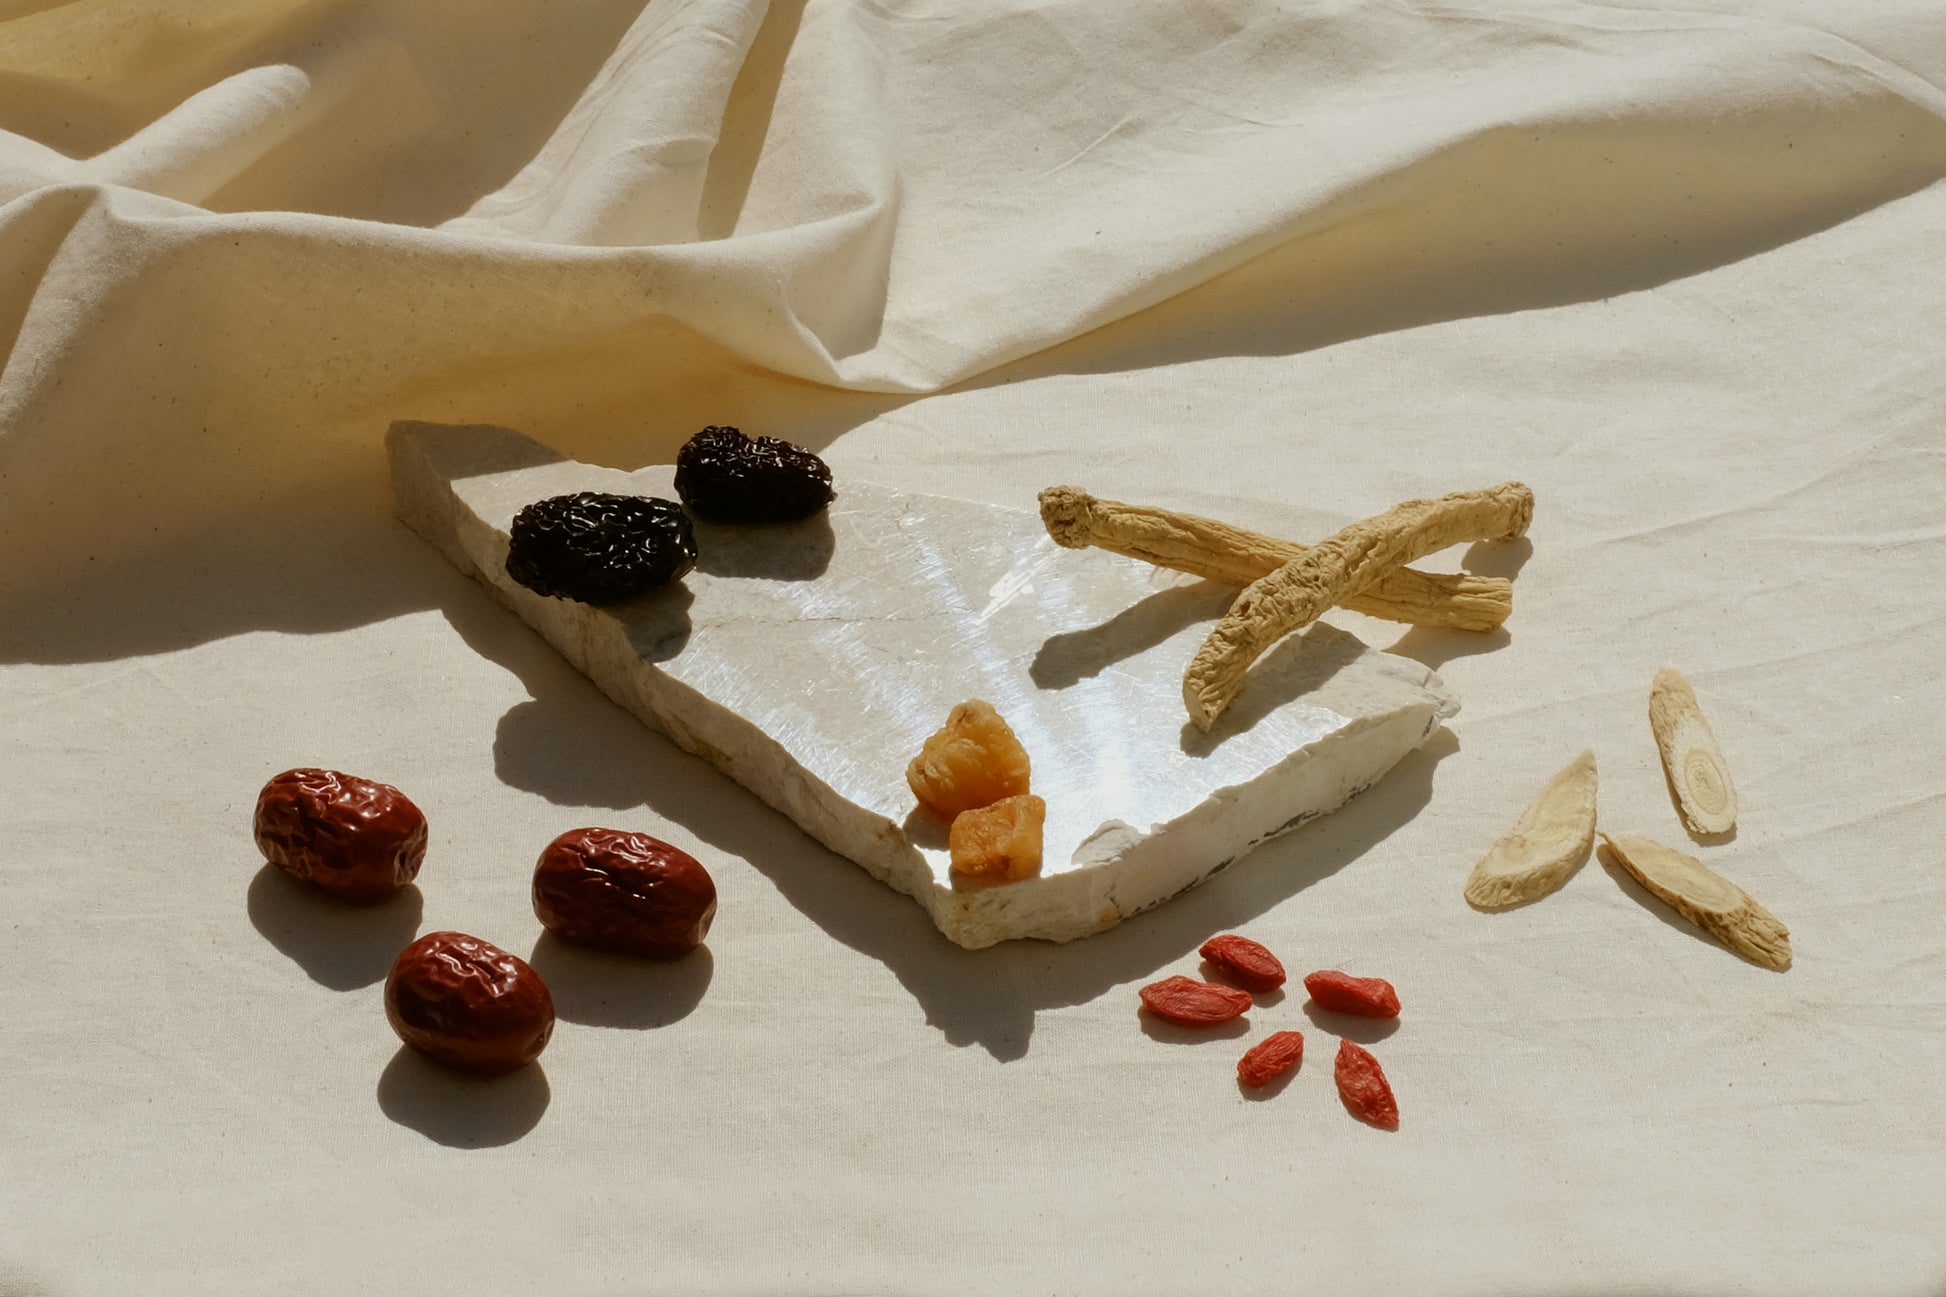 Chinese herbs red dates jujube, black dates, longan, codonopsis dang shen, astragalus bei qi, goji berries laid out on a piece of marble. Image 2